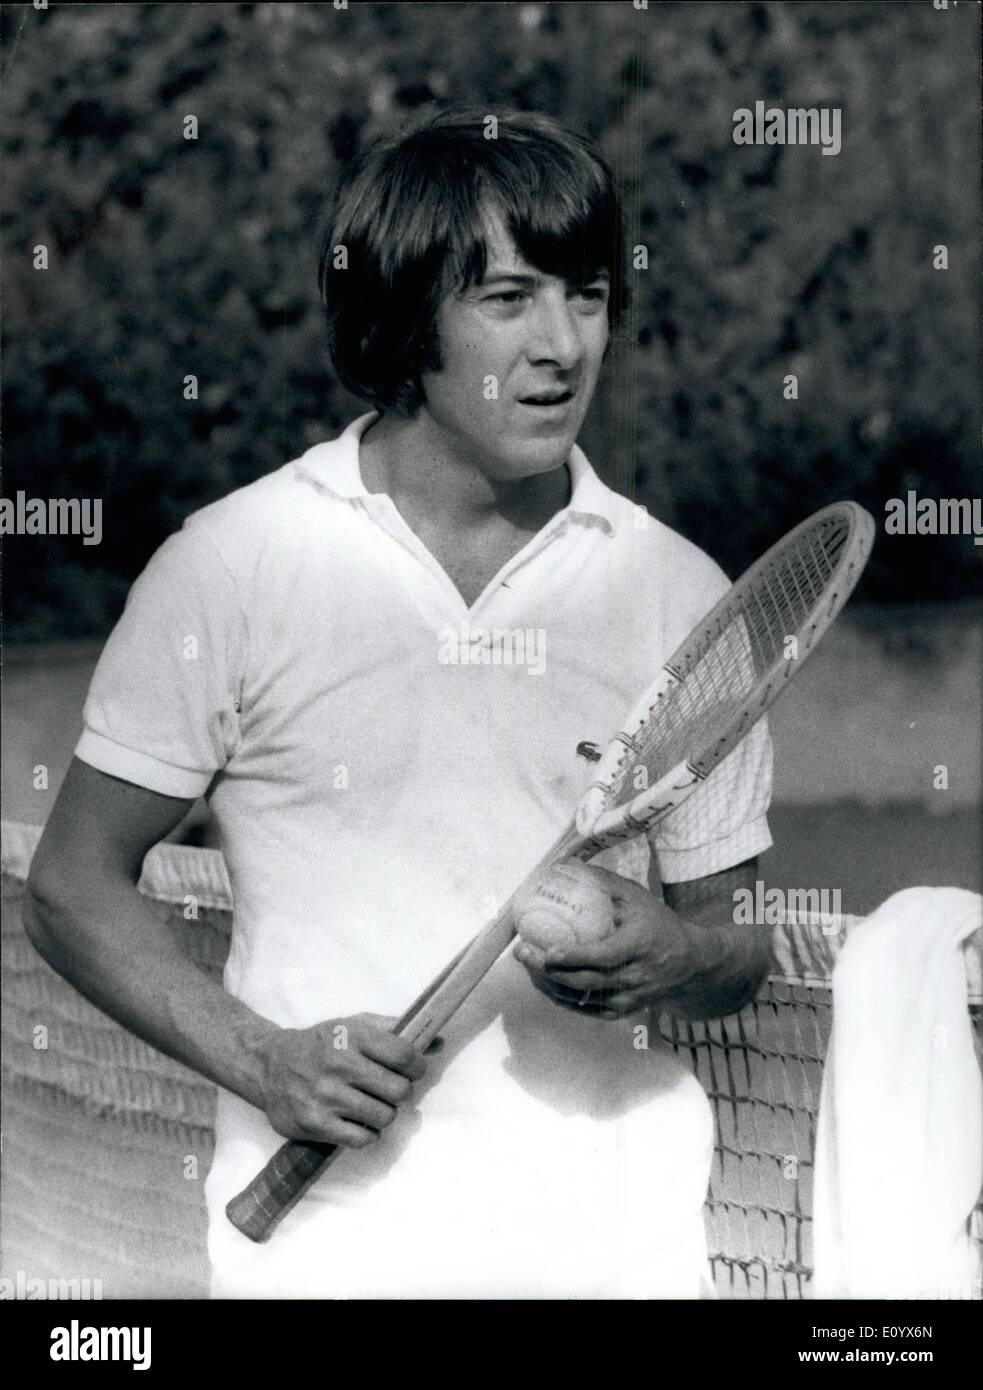 Sep. 09, 1971 - Dustin Hoffman plays tennis. Hoffman the famous actor, spends these days in Rome waiting to play a film up to day directed by director Pietro Germi ''Pinche Divorzjo Non Ci Divida'' besides with star Carla Gravina e Stefania Sandrelli. Now is loving tennis a little for passion and also to recover the ight last during the holidays early. Every morning takes lessons and casyto find him in a well bakland and volee. Stock Photo